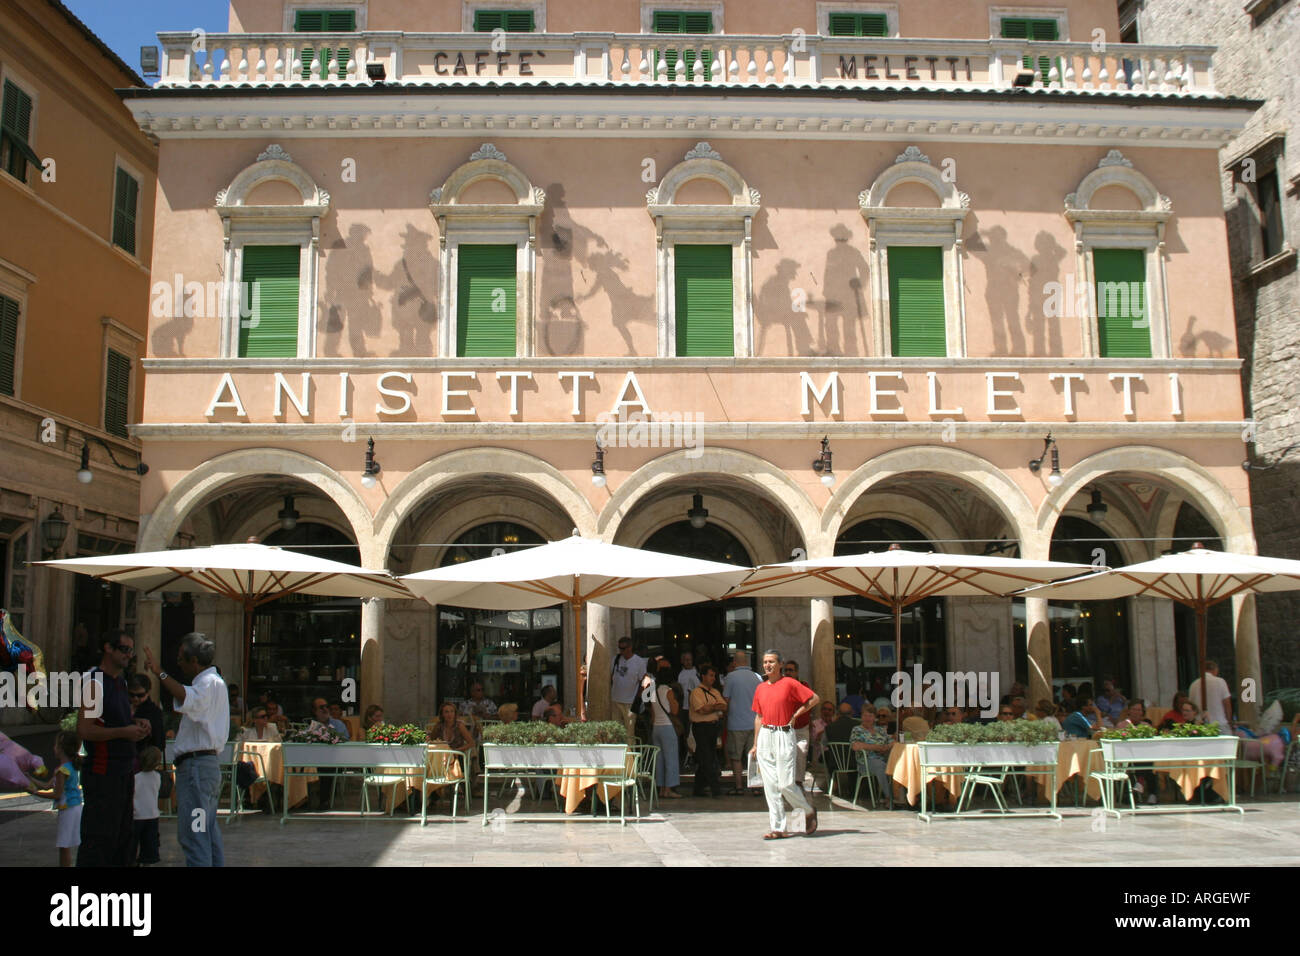 Sunday morning at The famous,beautiful and  historic Meletti Caffe in Ascoli Piceno, Le Marche ,Italy Stock Photo